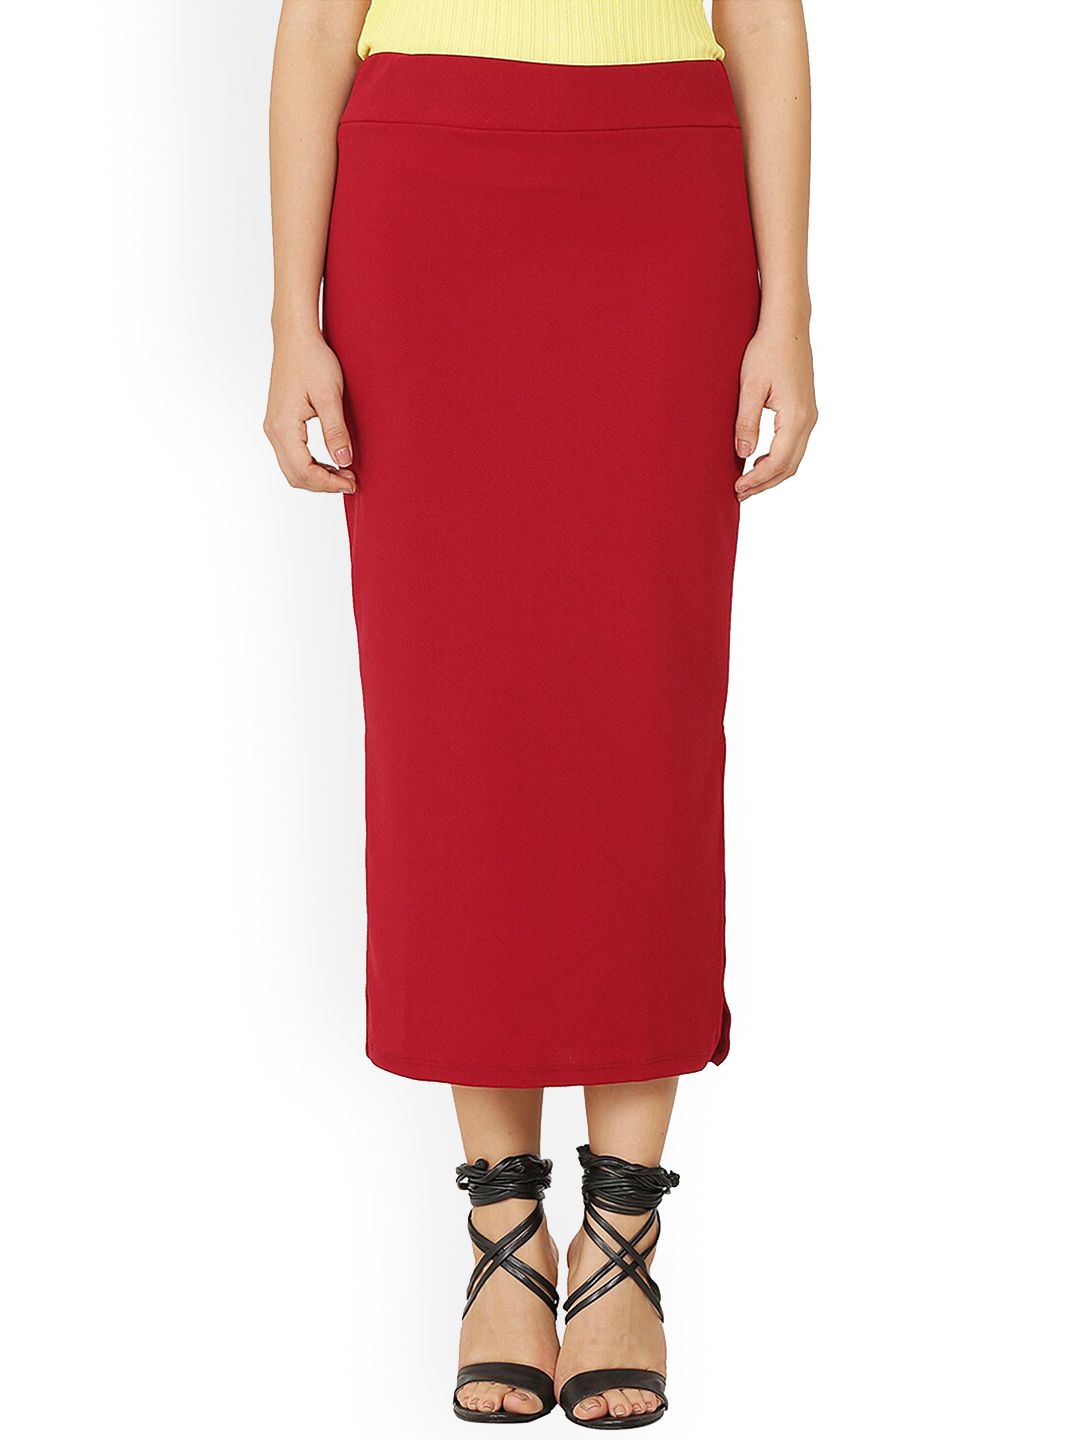 FRANCLO Women Maroon Solid Jacquard Straight Ankle-Length Skirt Price in India